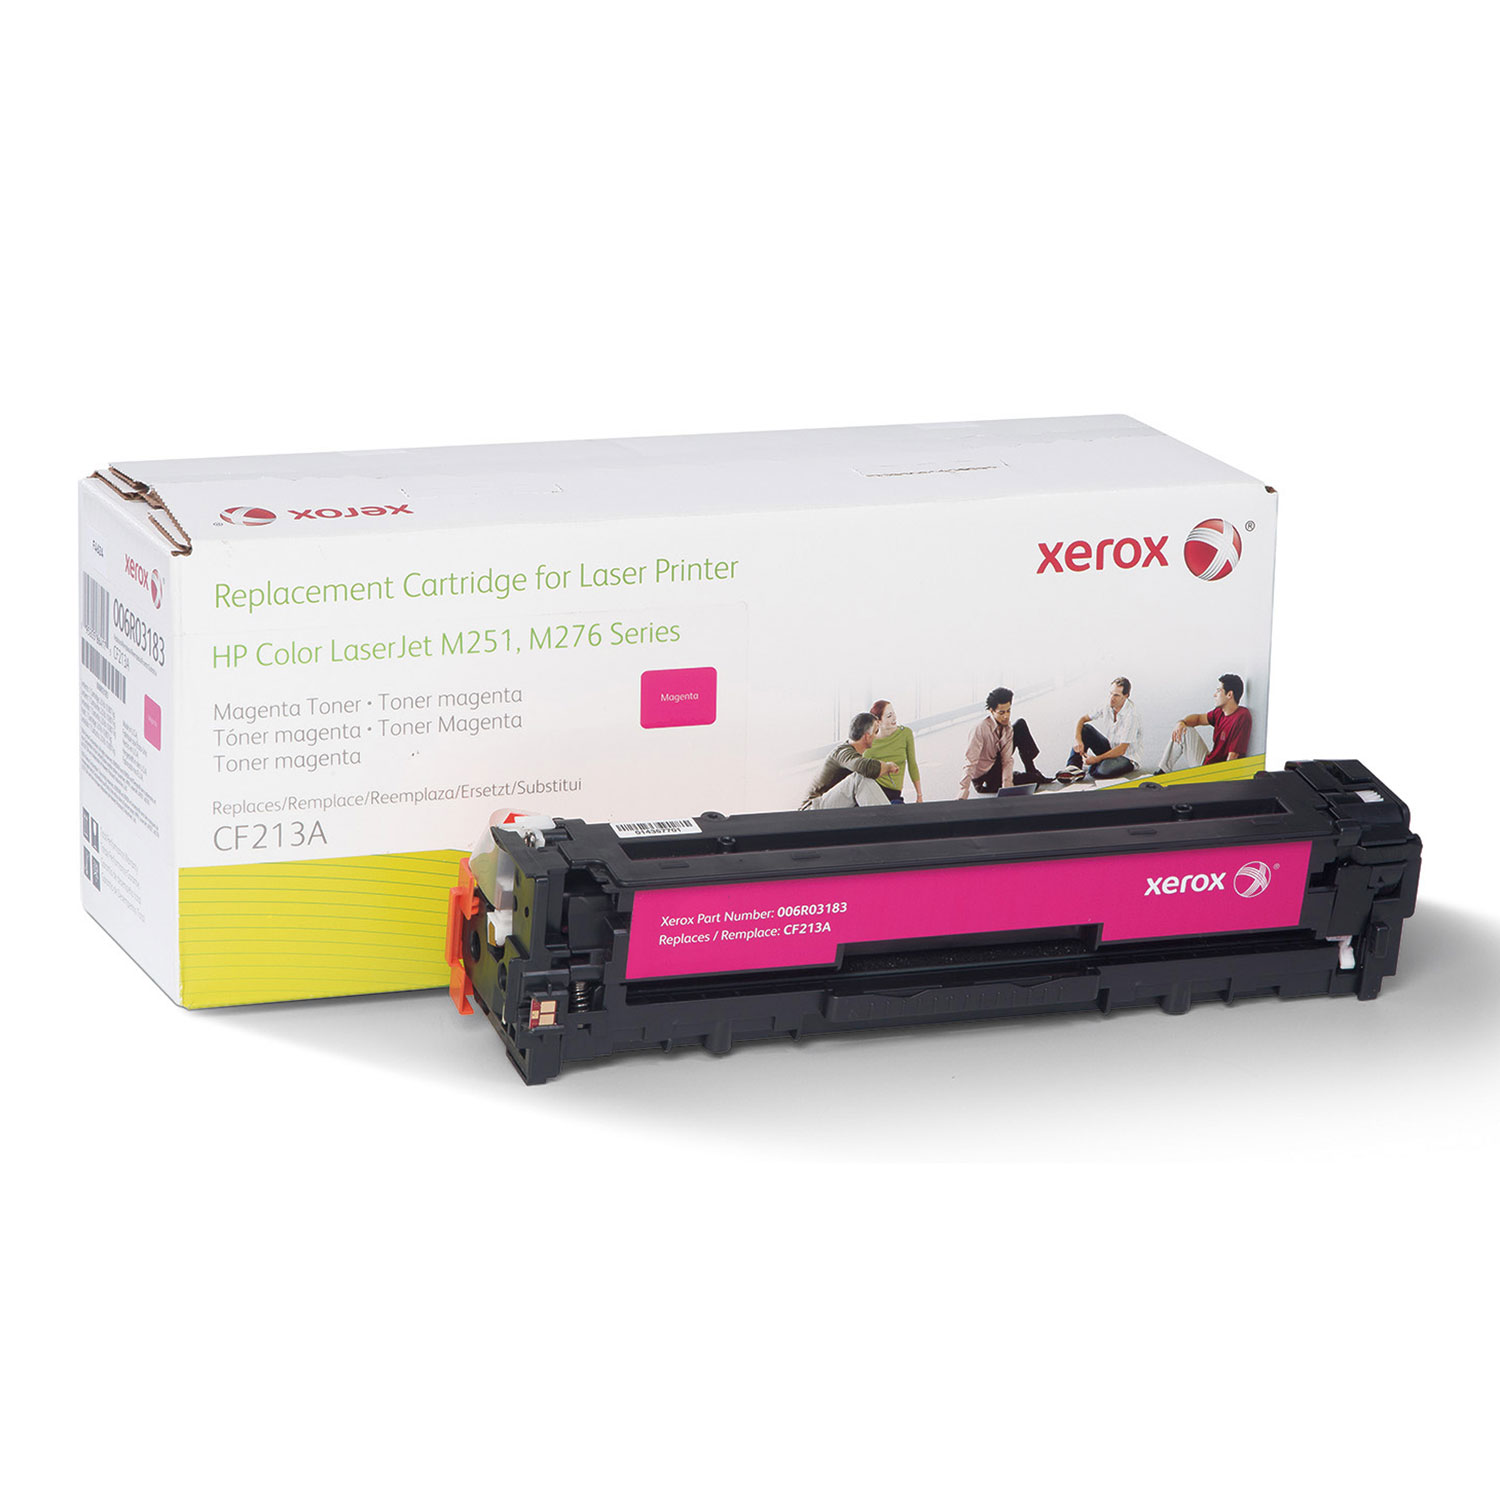  Xerox 006R03183 006R03183 Remanufactured CF213A (131A) Toner, 1800 Page-Yield, Magenta (XER006R03183) 